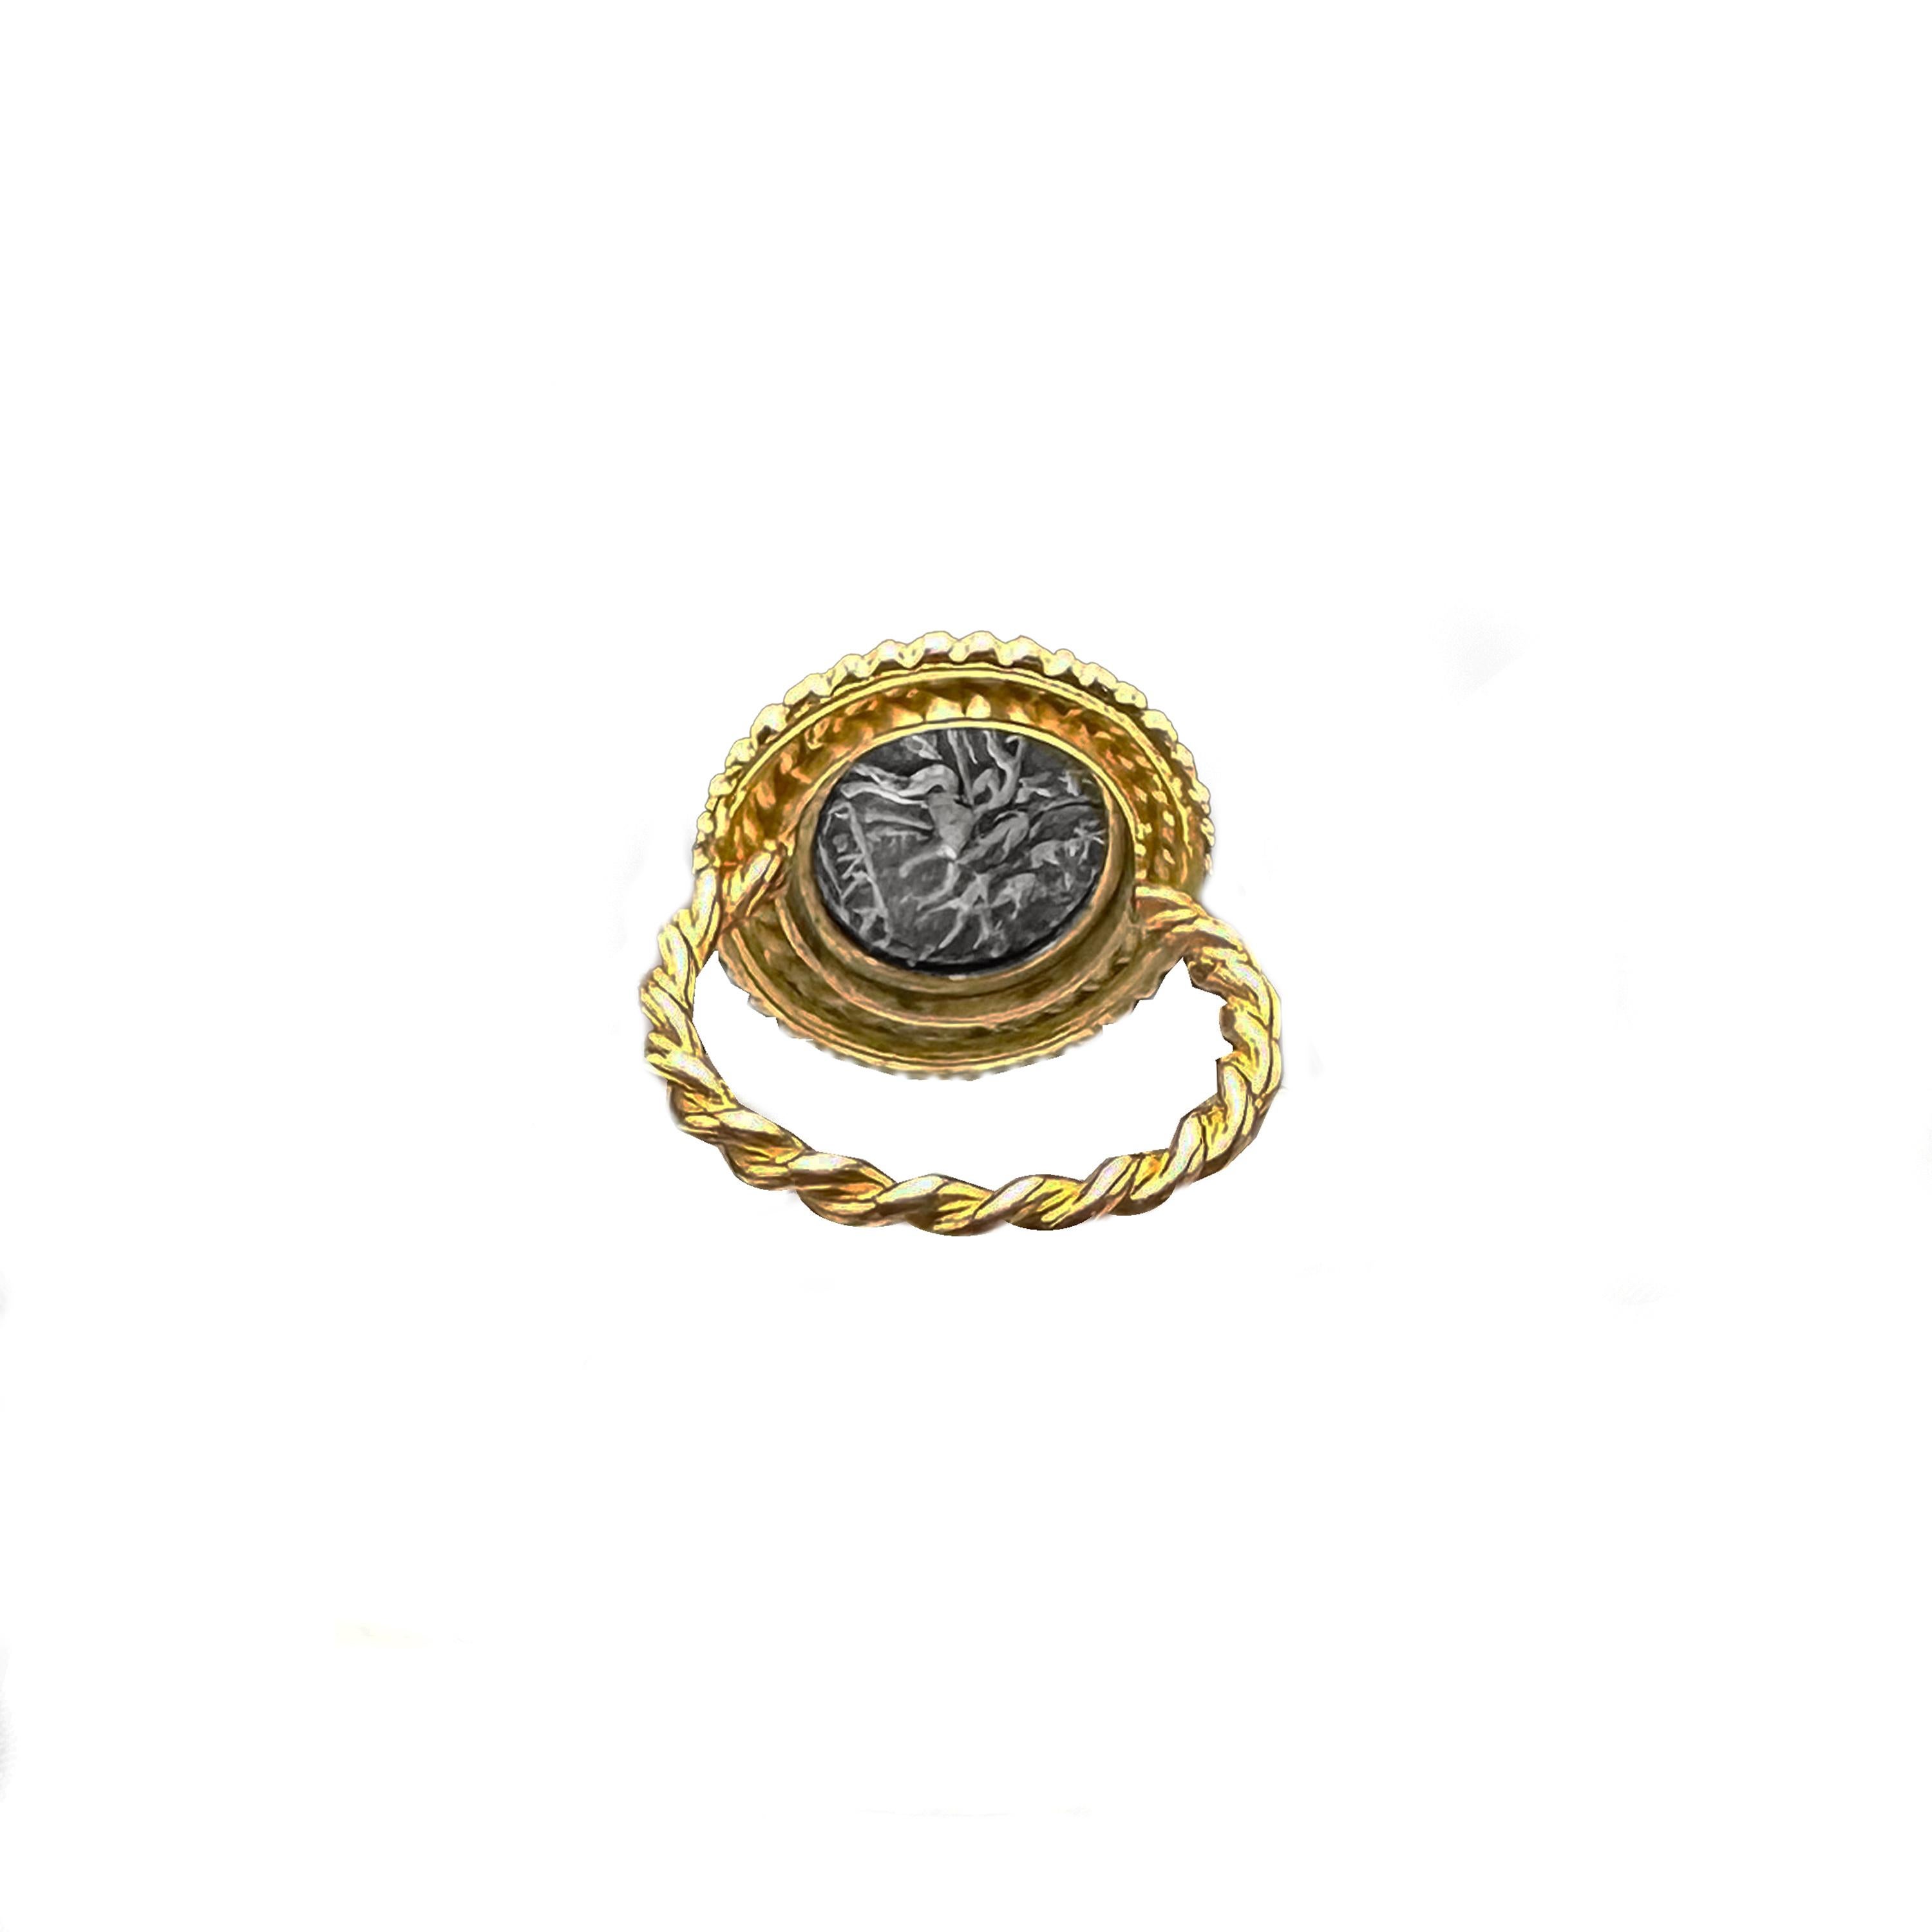 Genuine Roman Coin (3rd cent. BC) 18 Kt Gold Ring depicting the Goddess Rome  For Sale 2